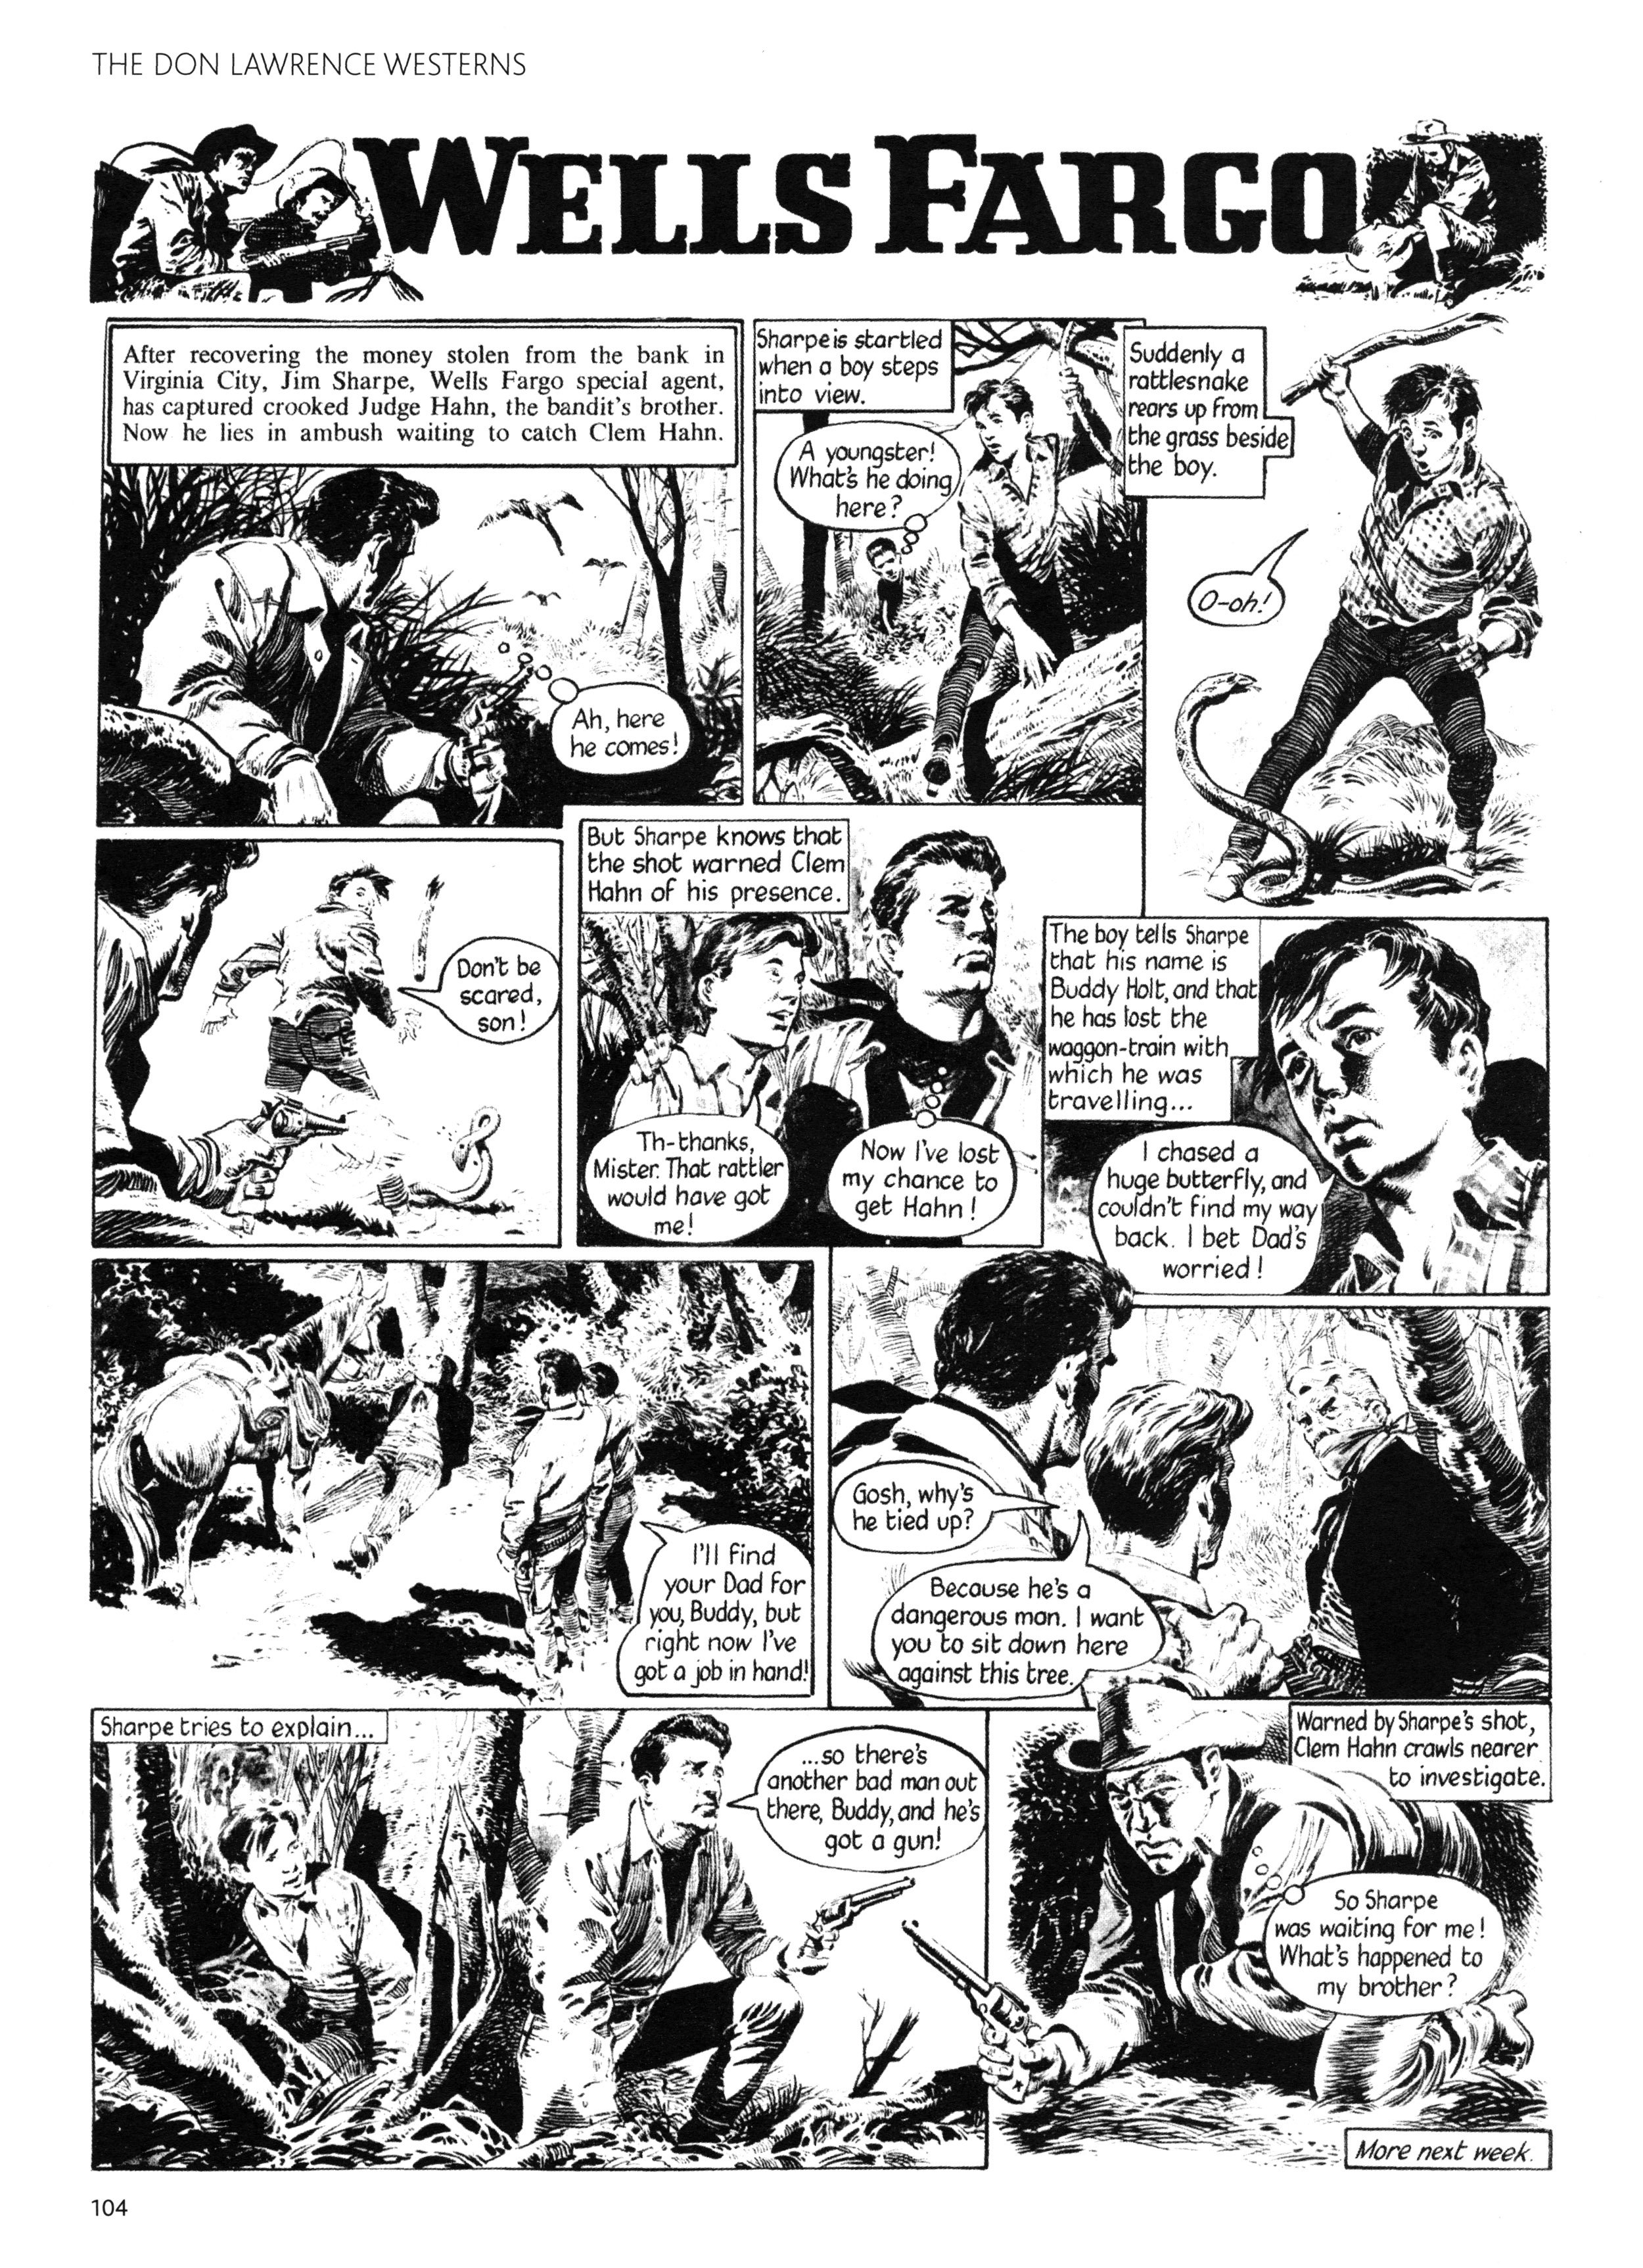 Read online Don Lawrence Westerns comic -  Issue # TPB (Part 2) - 5